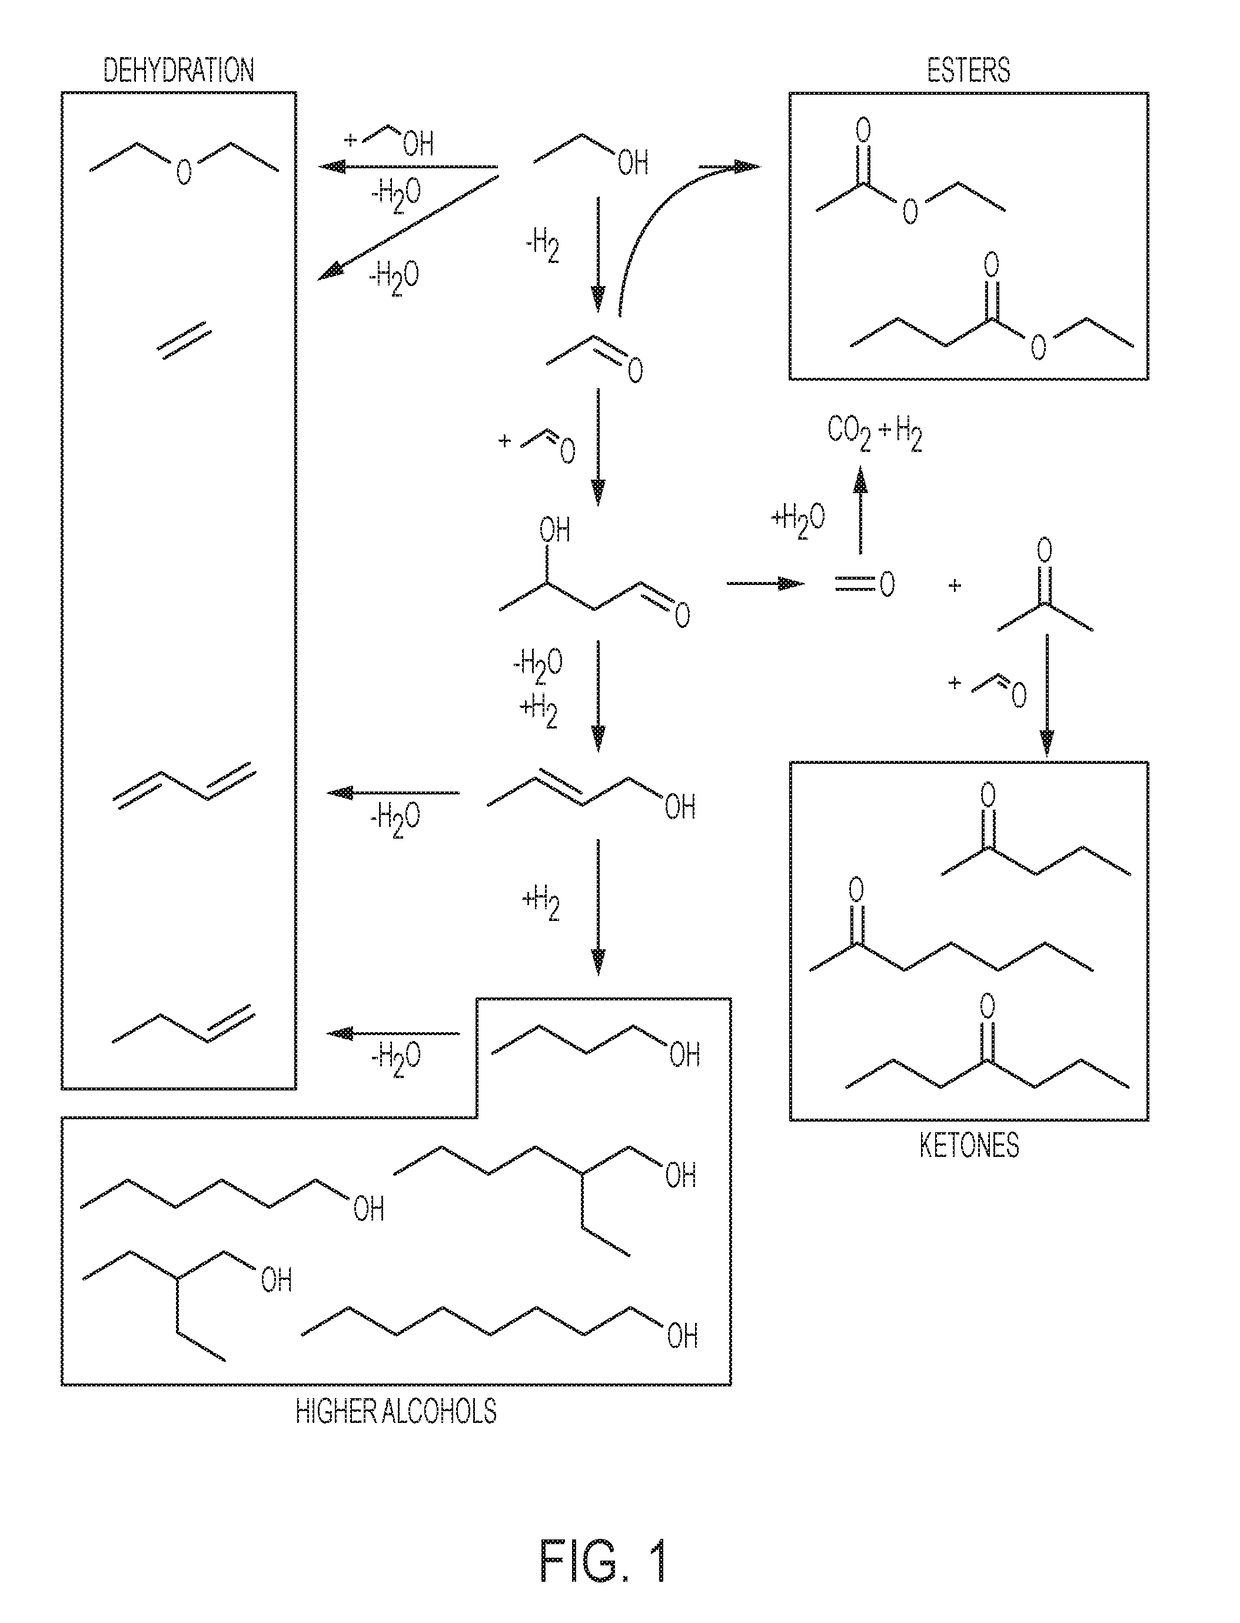 Method of converting ethanol to higher alcohols